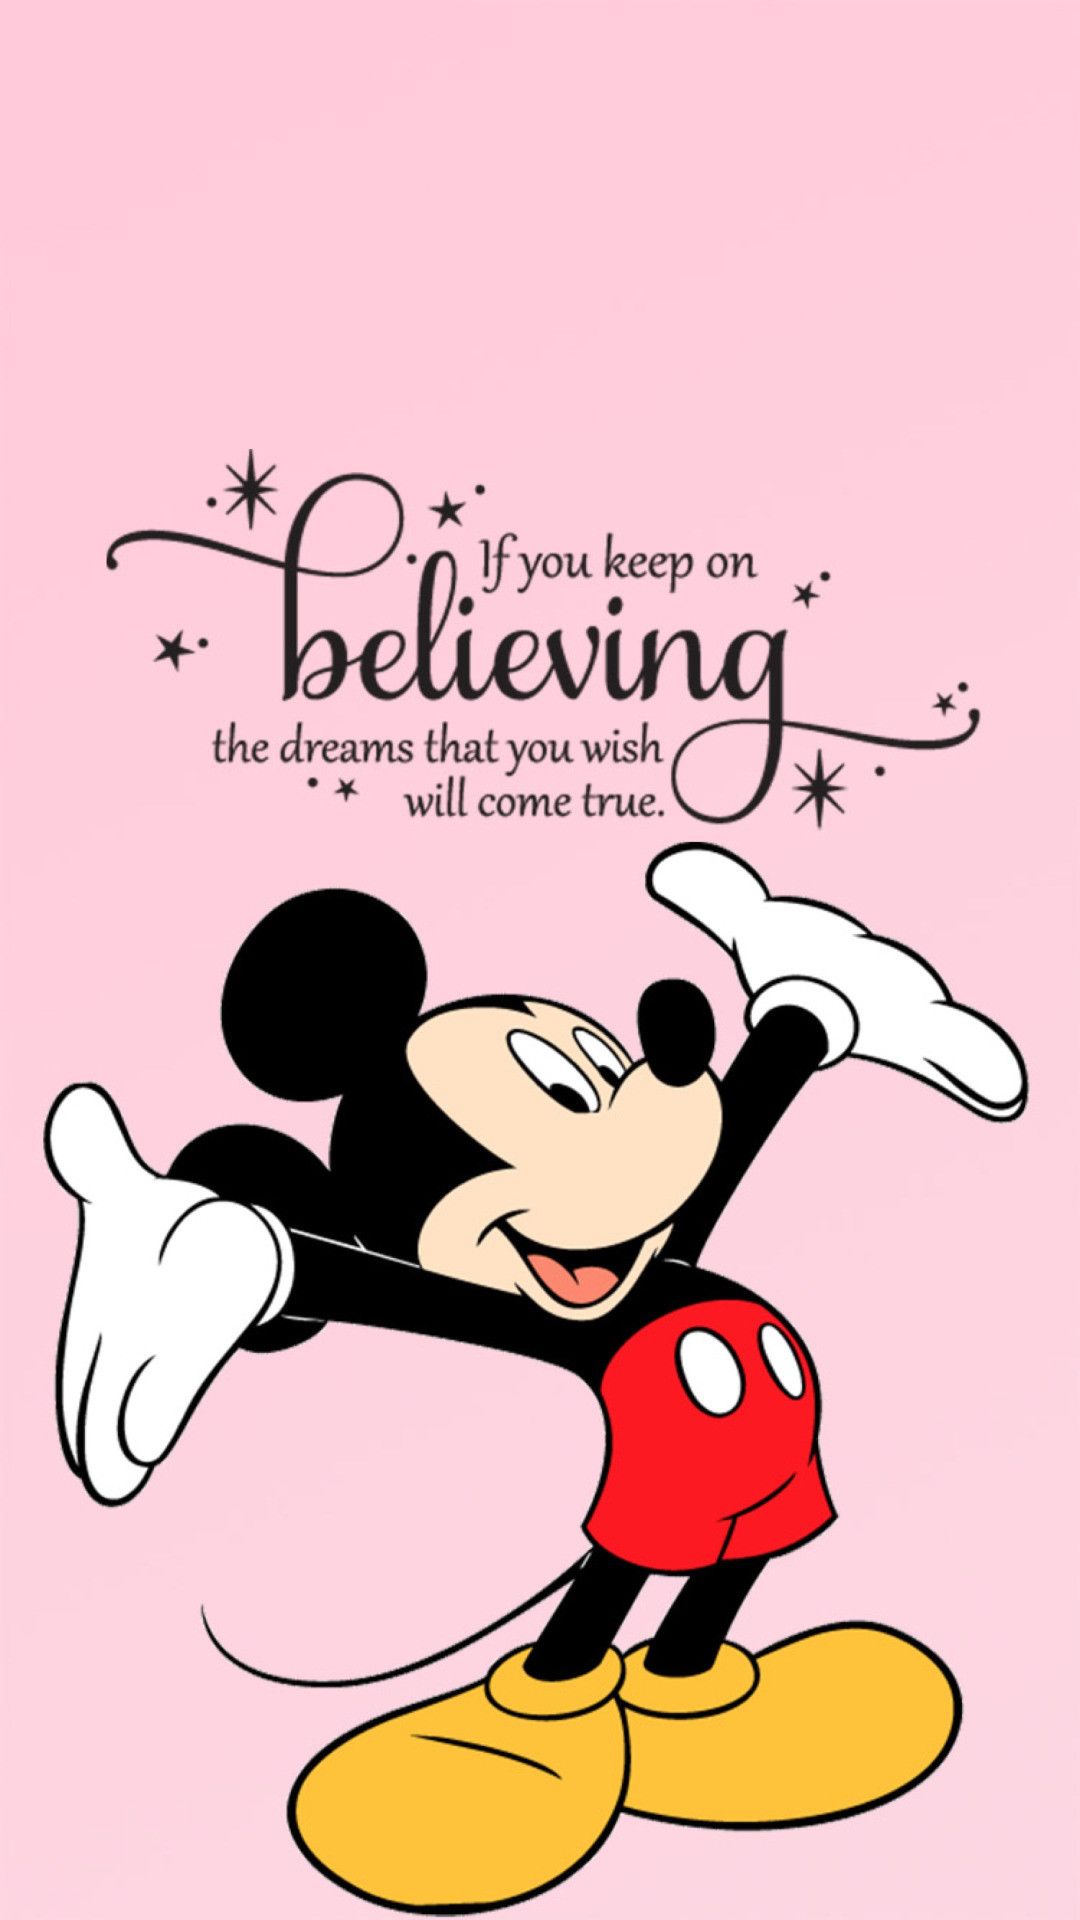 Mickey mouse quote if you look on believing the dreams that come true - Mickey Mouse